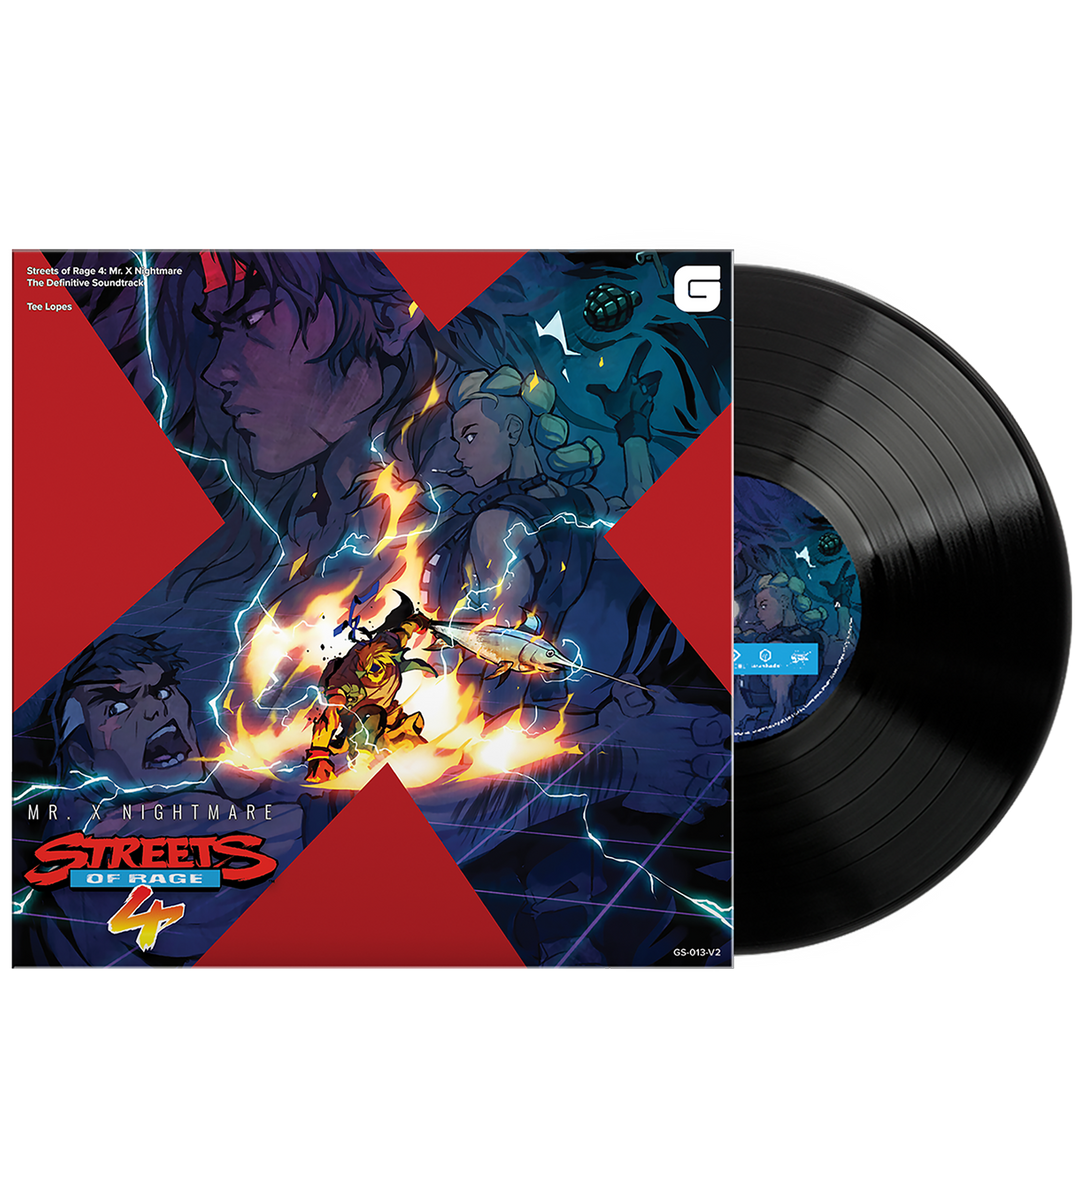 Streets of Rage 4: Mr. X Nightmare (Original Game Soundtrack) - Album by  Tee Lopes